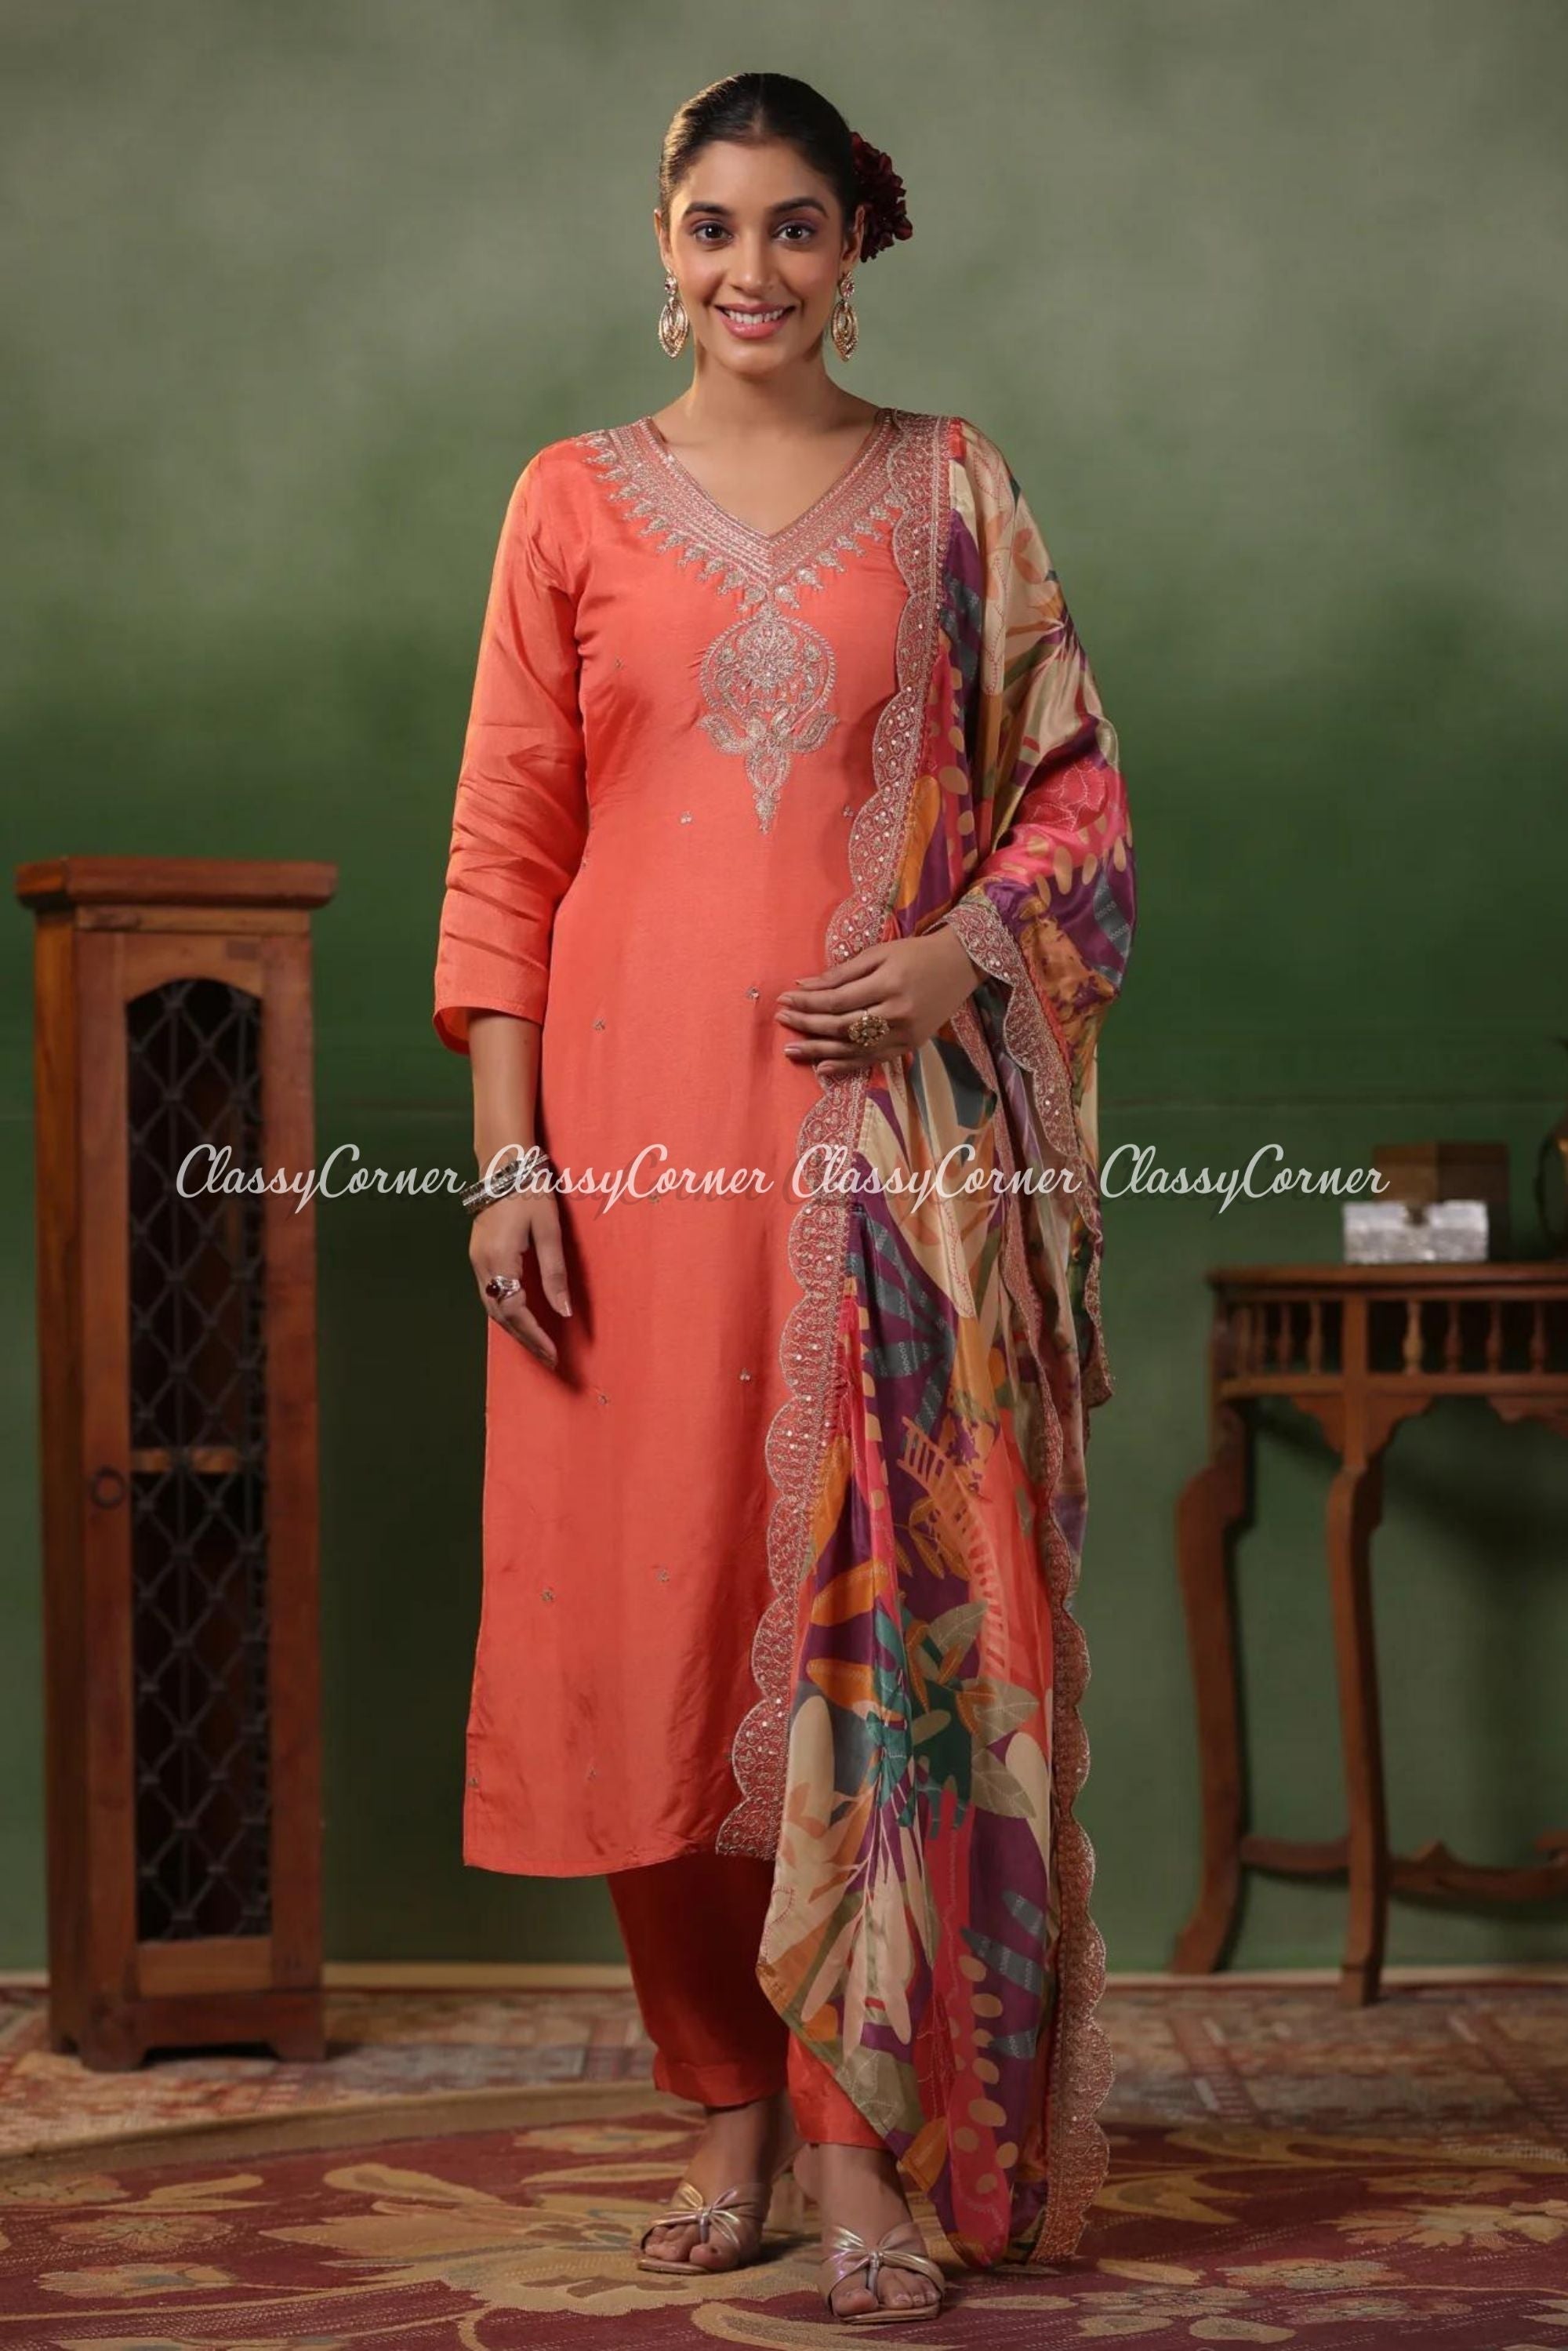 Indian wedding guest outfits